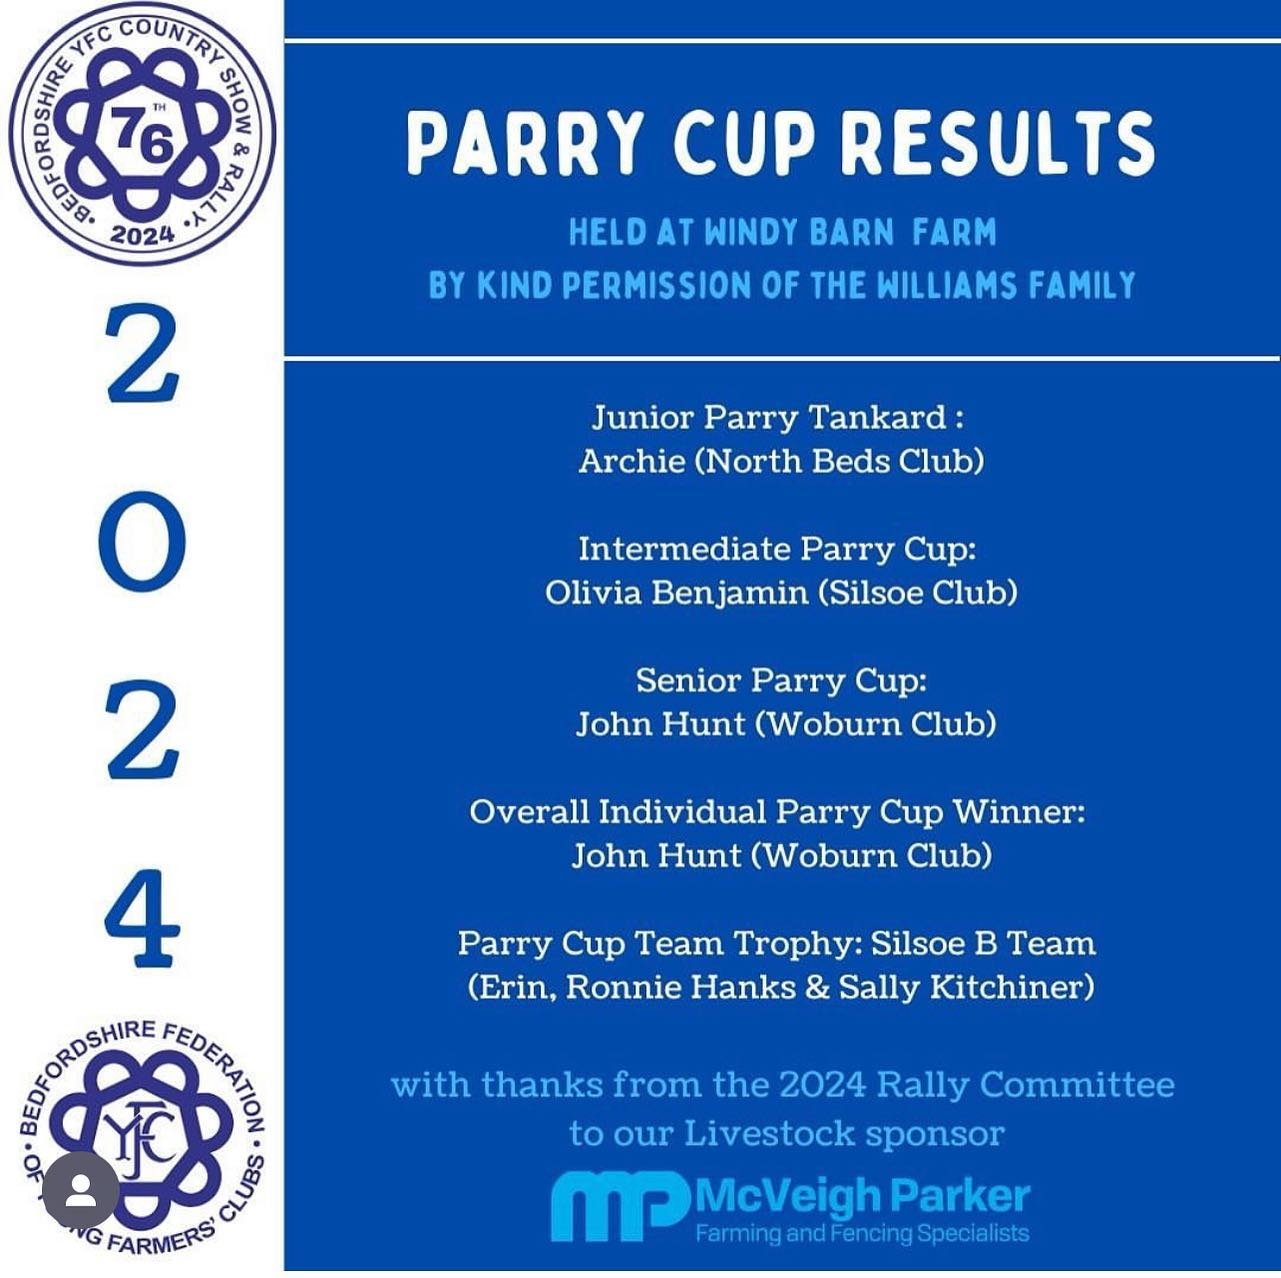 Our party cup and equine results! 

The past 2 weekends have been busy for us yf&hellip; well done to all members competing